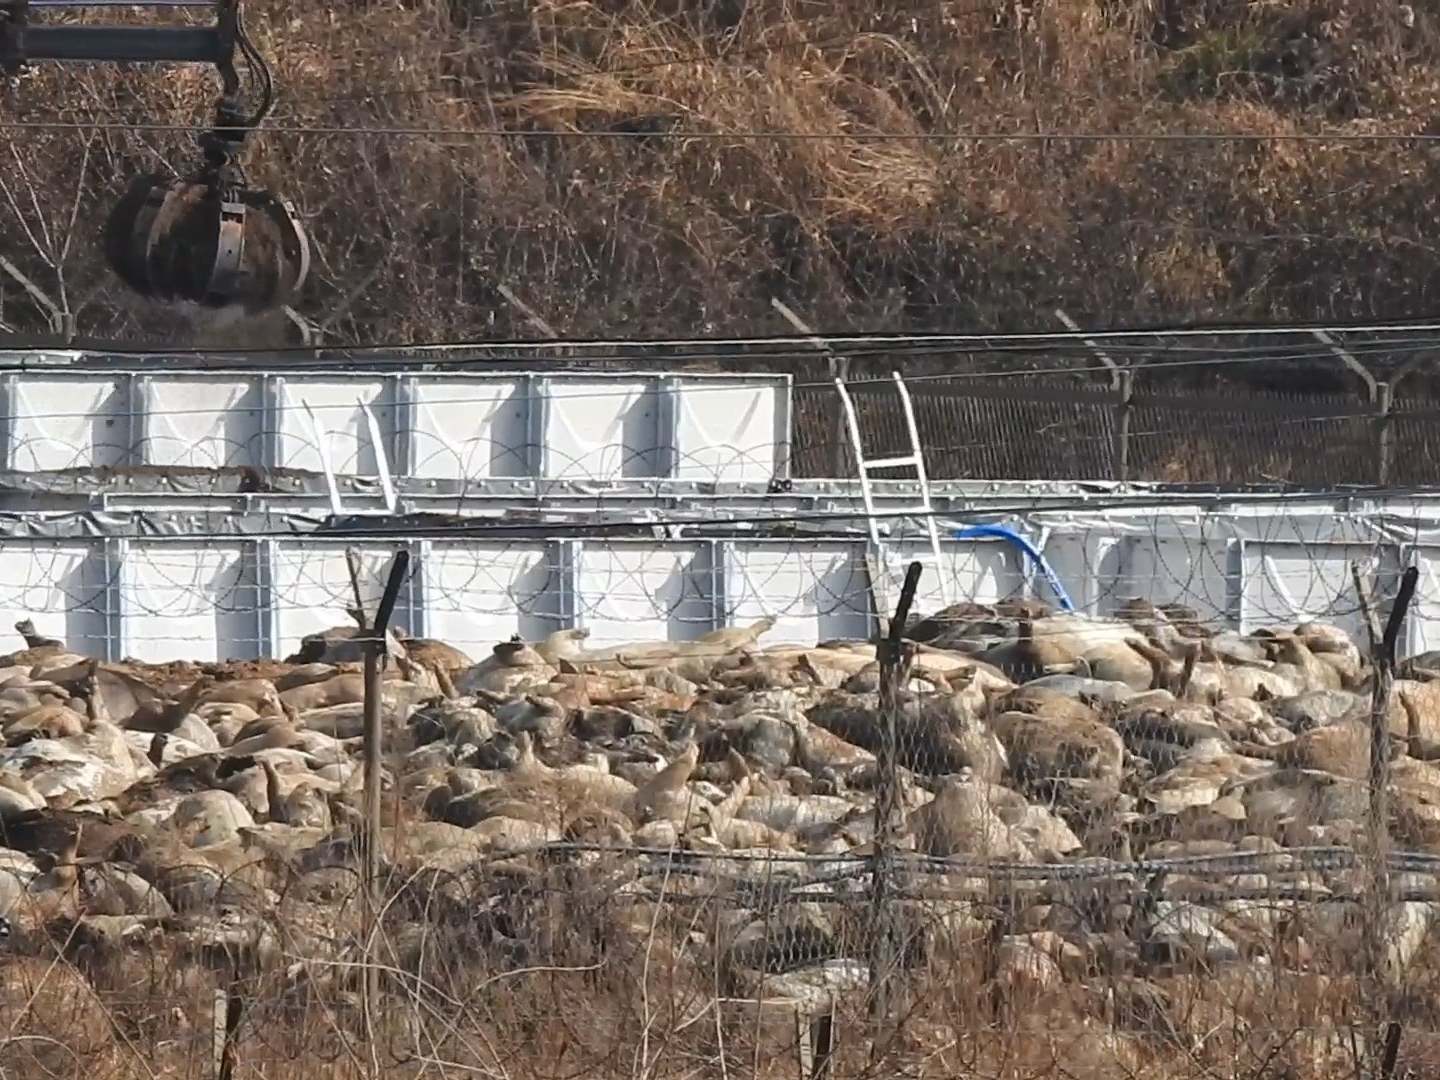 The Yeoncheon Imjin River Civic Network NGO said its pictures showed dead pigs piled up in a car park in Yeoncheon county